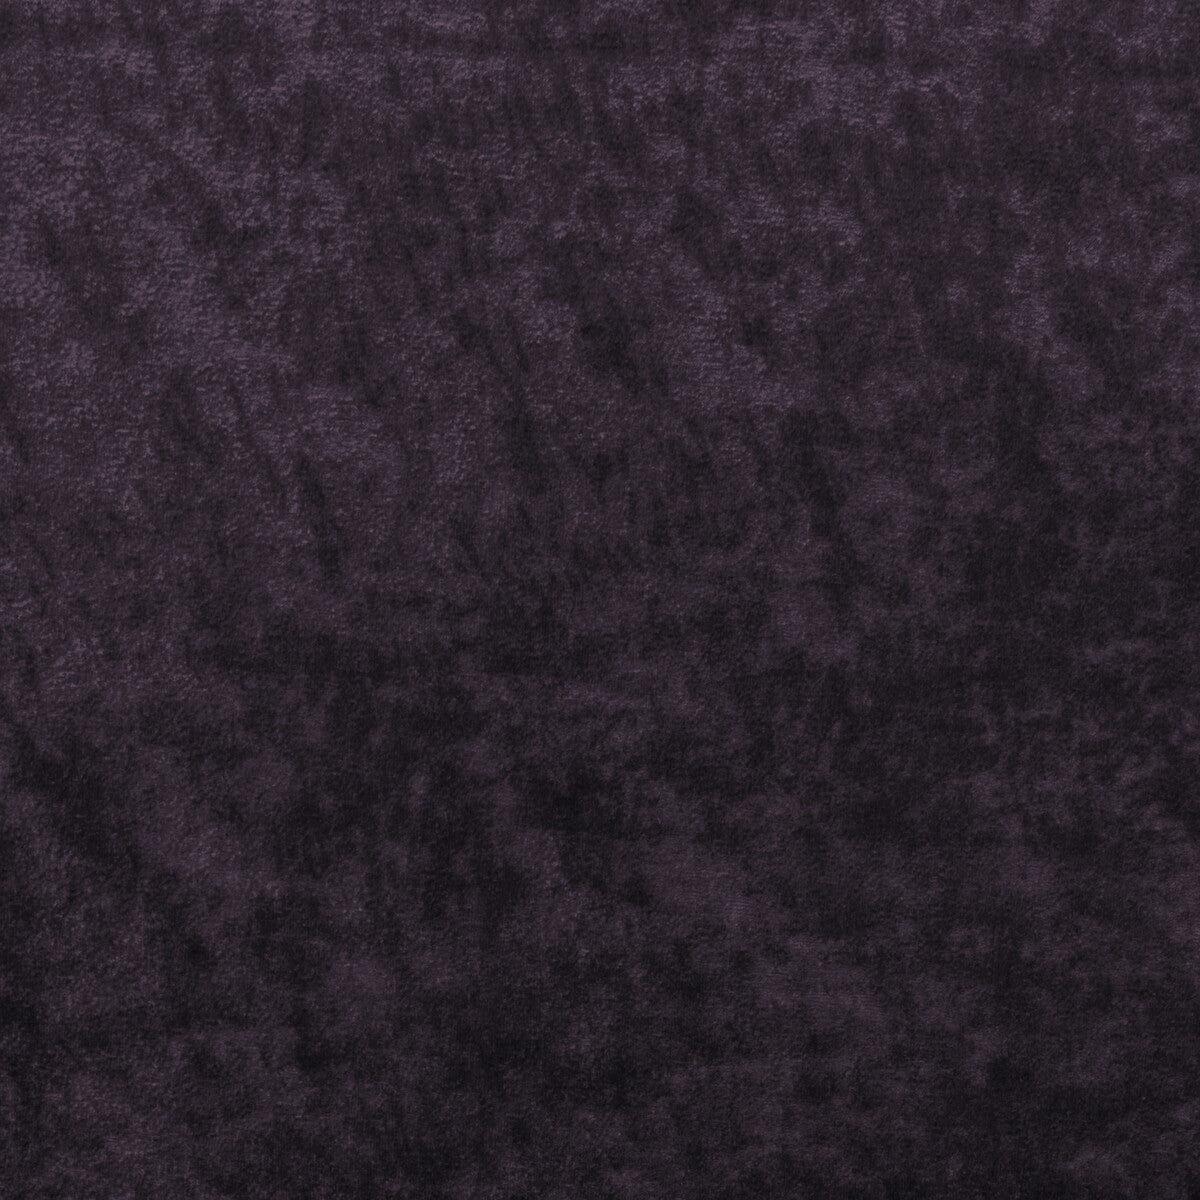 Triumphant fabric in amethyst color - pattern 36065.10.0 - by Kravet Couture